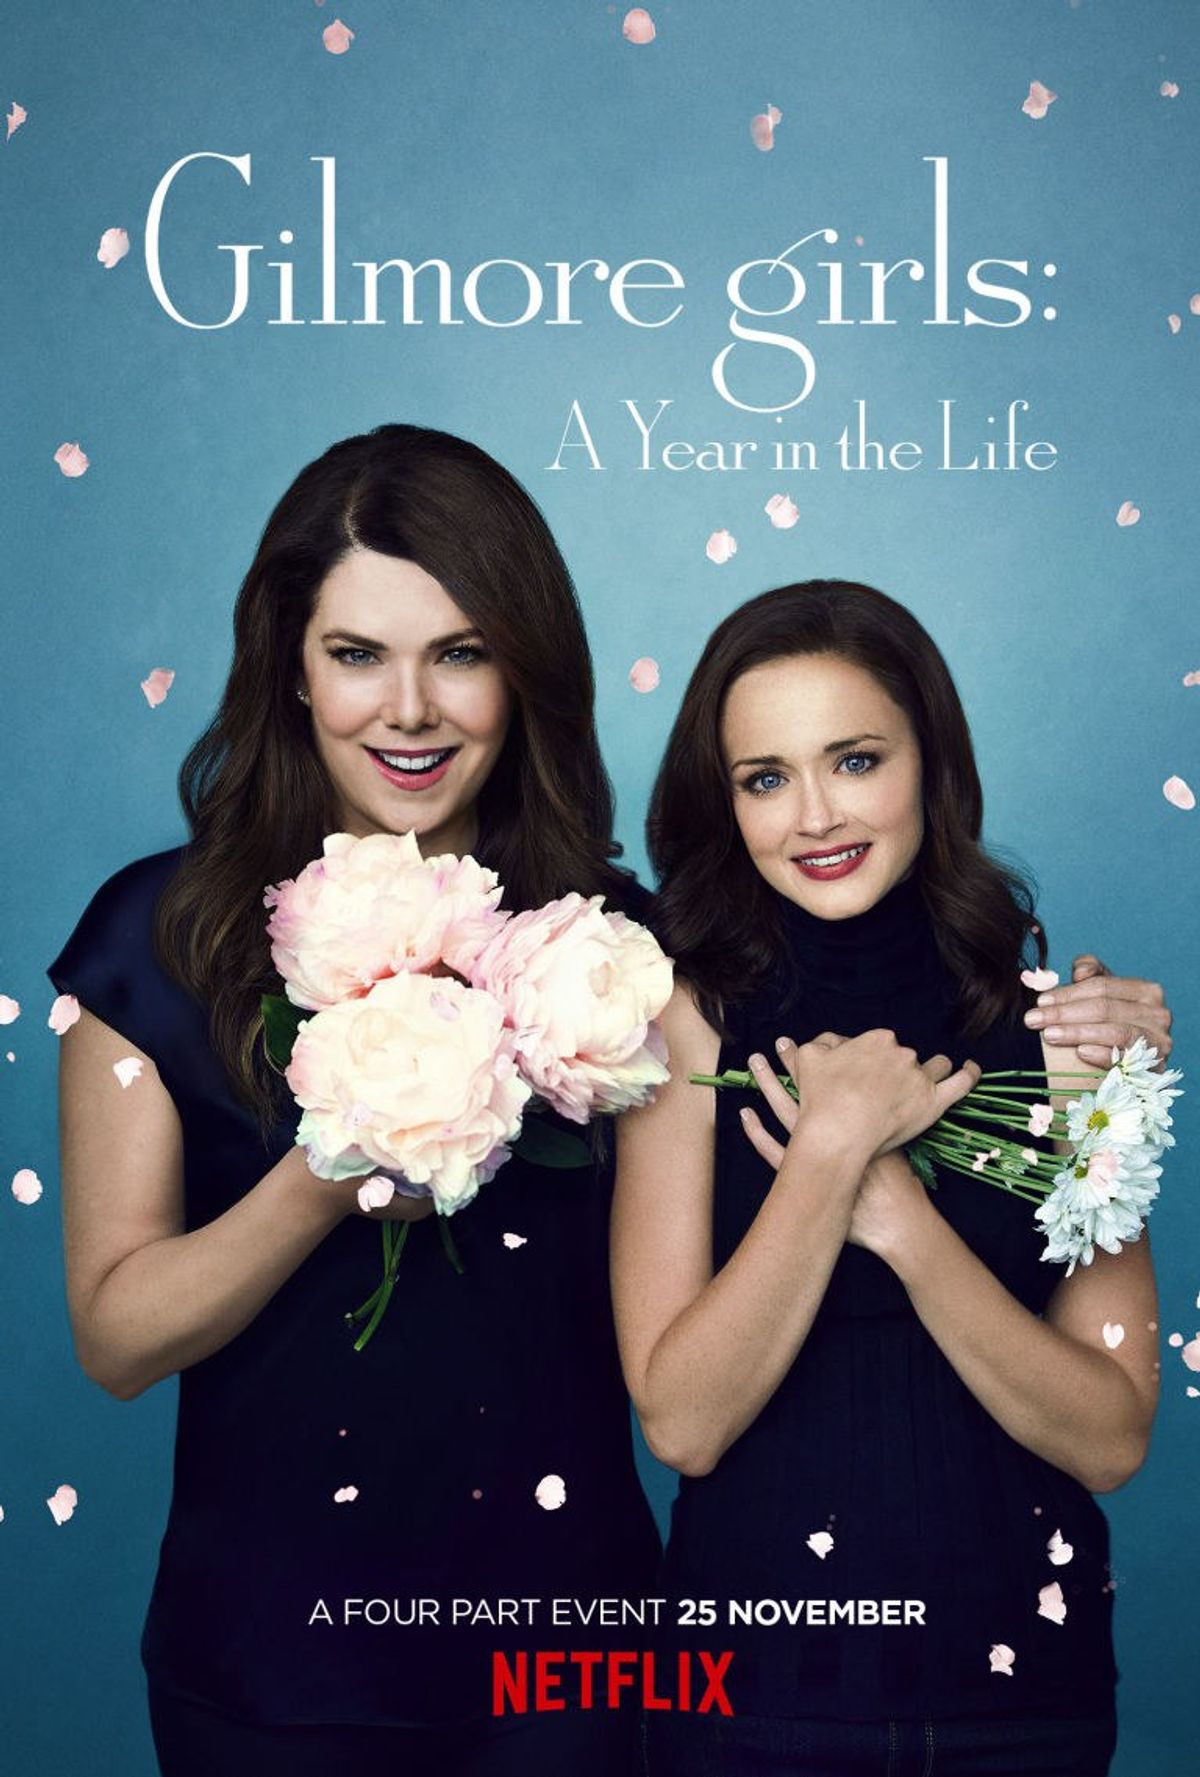 Gilmore Girls Revival: My Thoughts